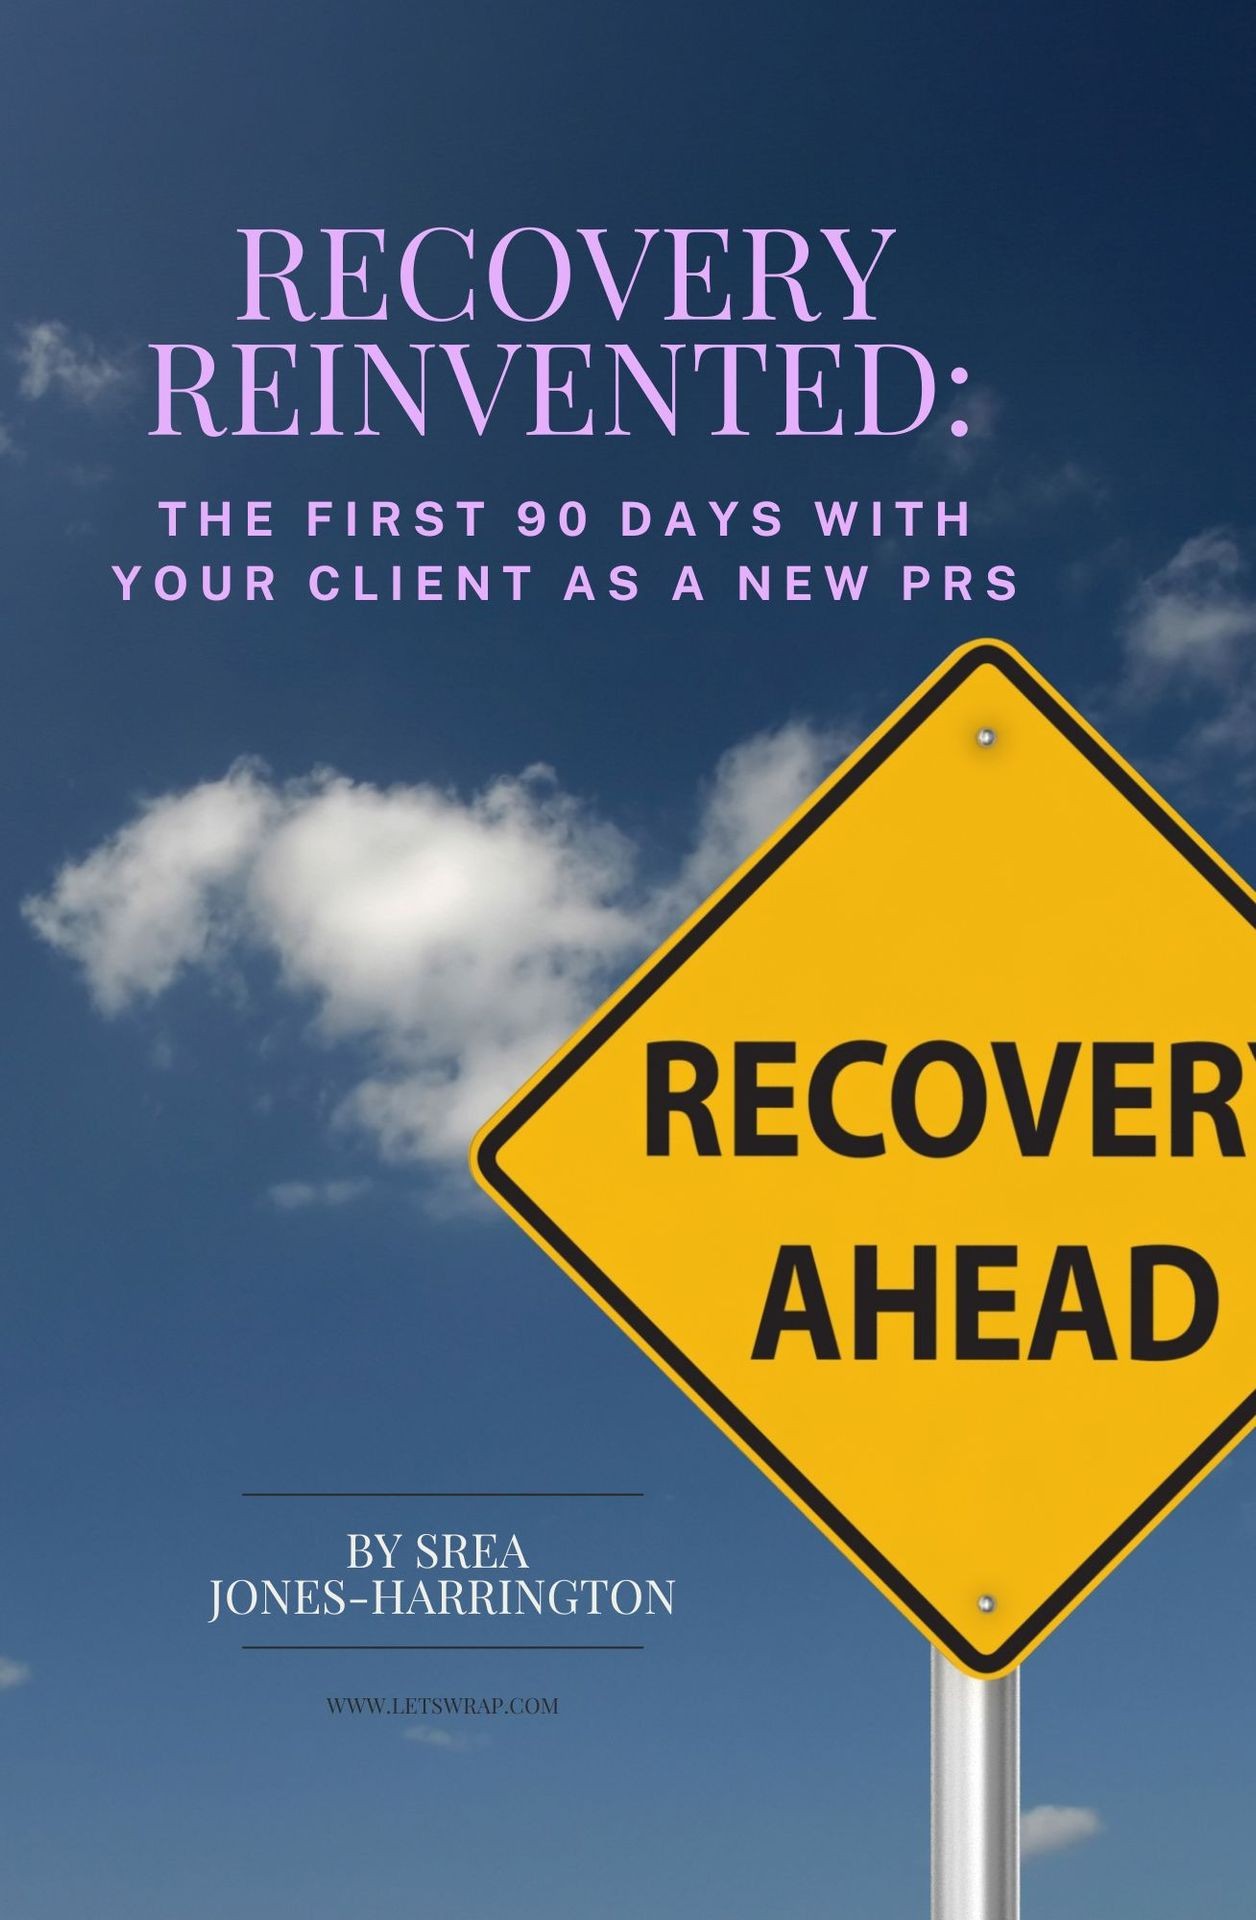 Recovery Reinvented